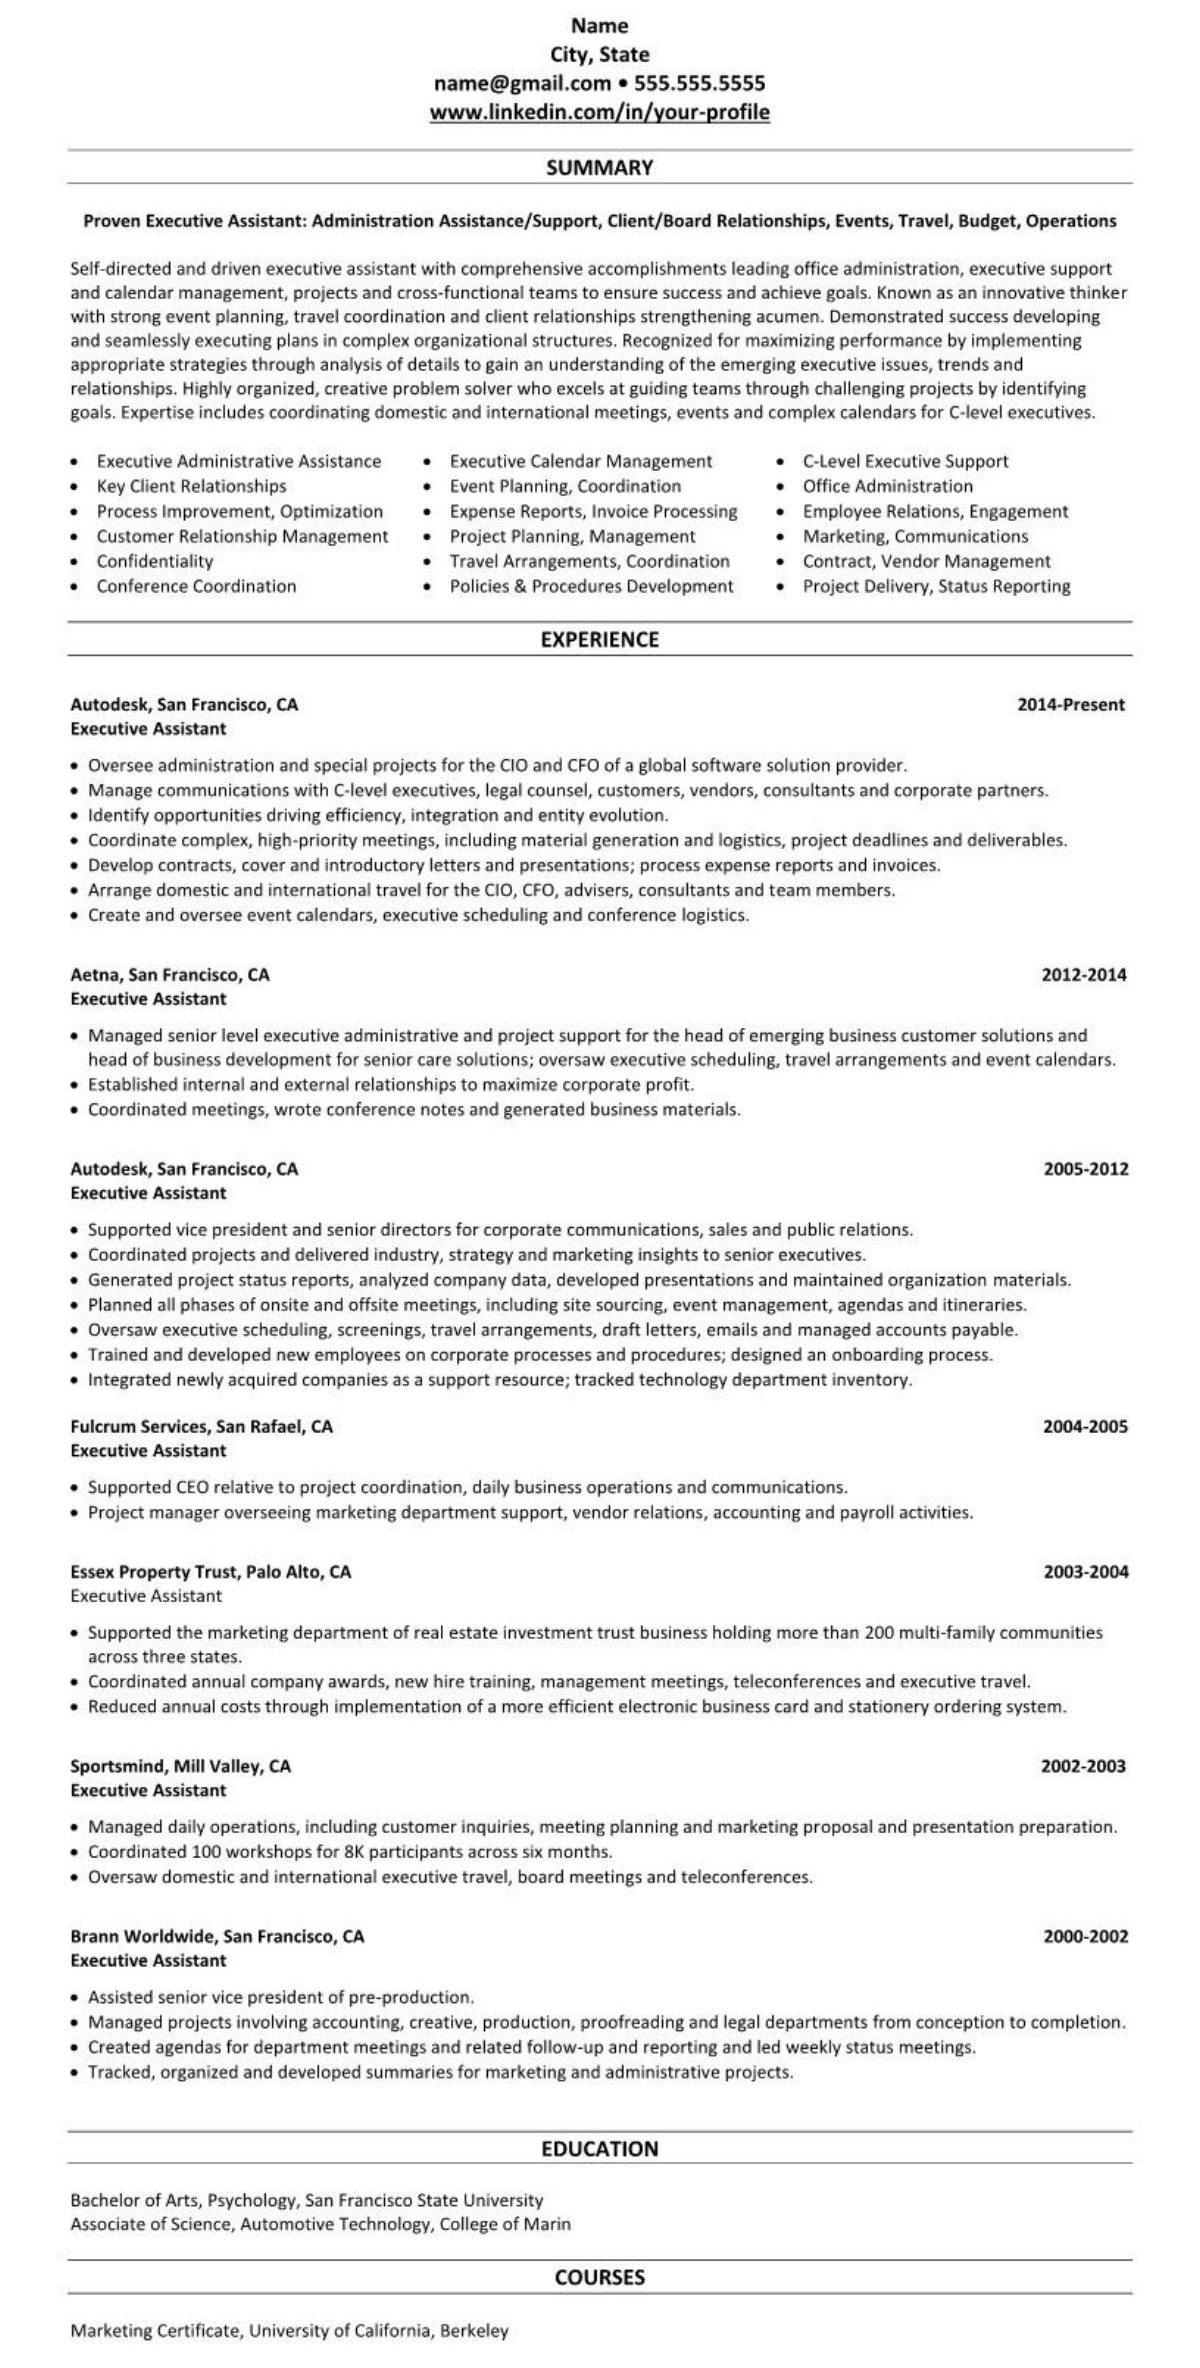 Professional resume example office manager secretary Assistant 2376